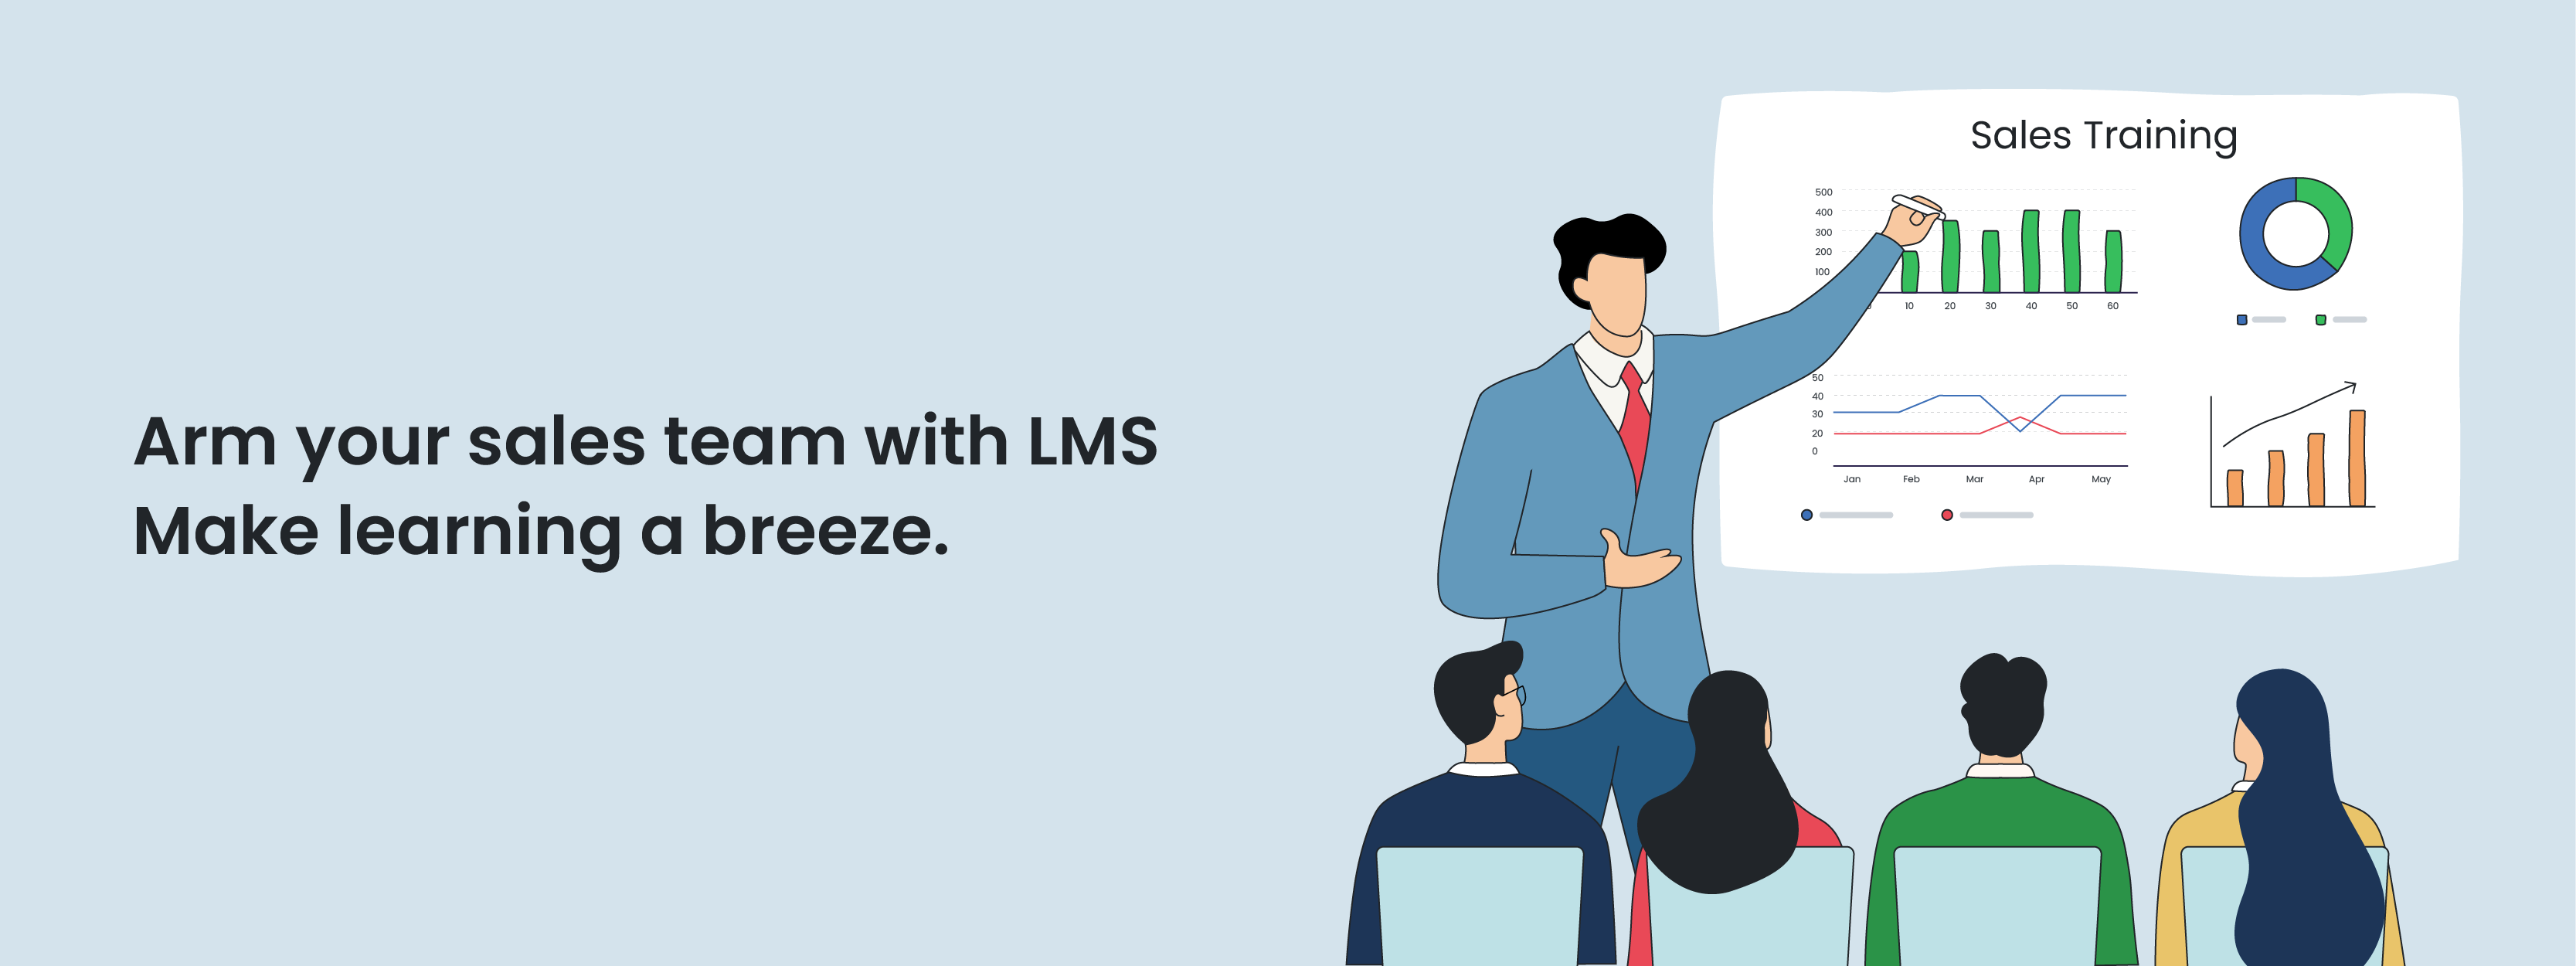 LMS for Sales training